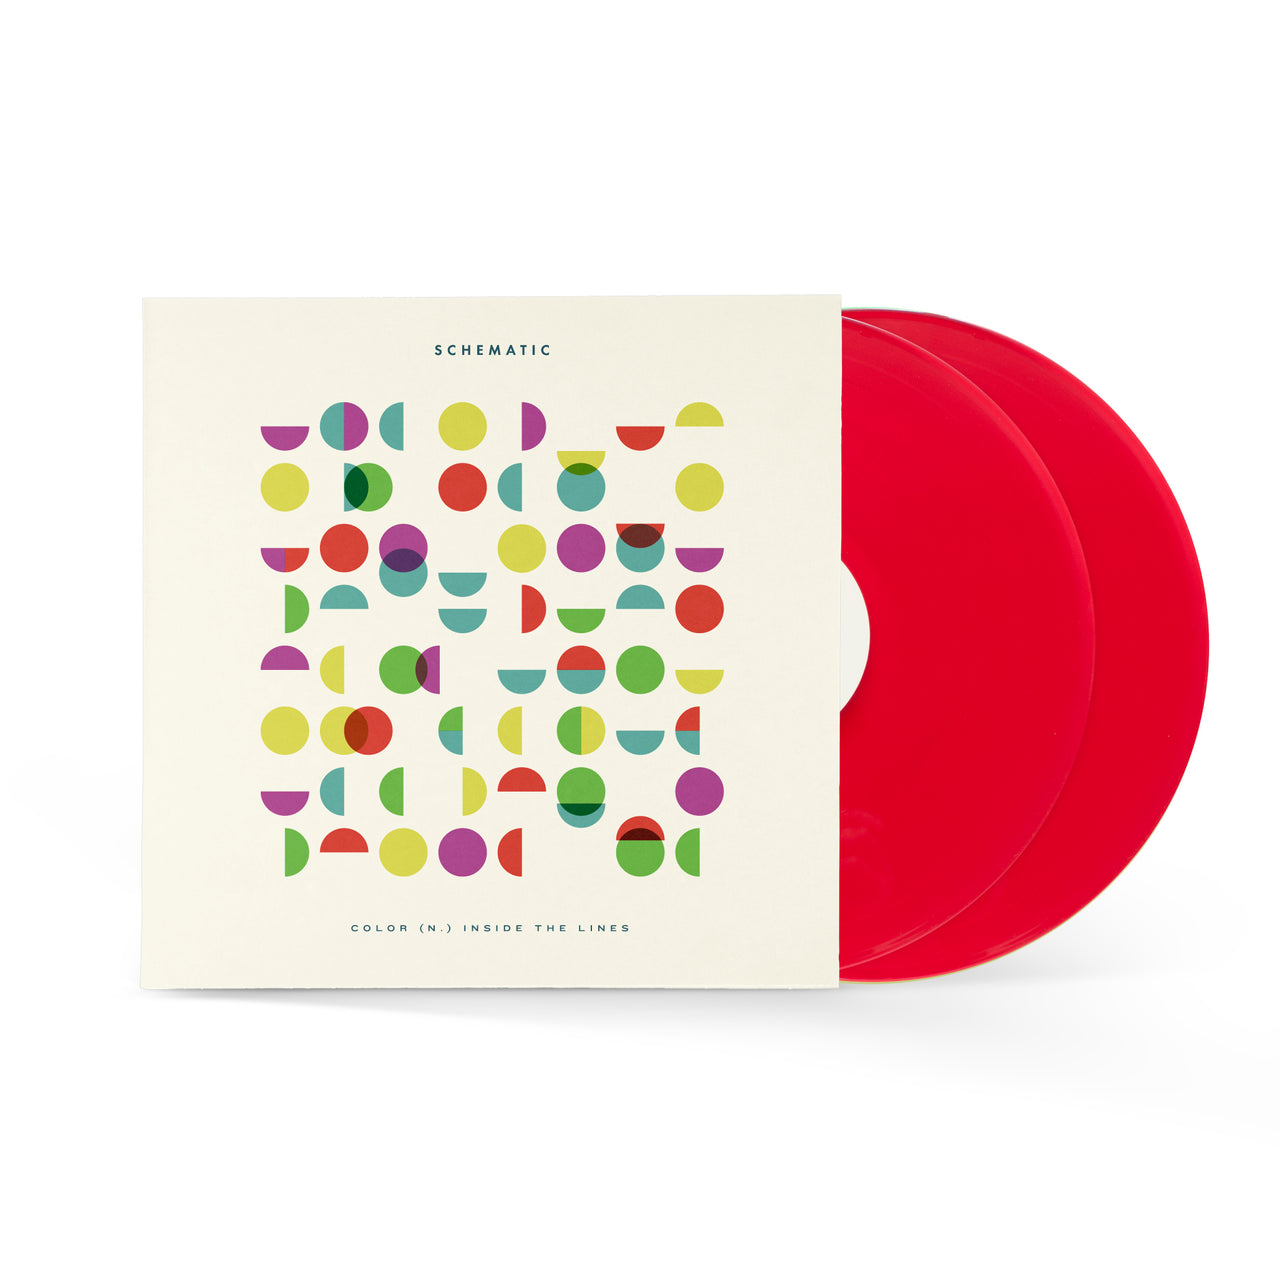 Schematic: Color Inside The Lines Vinyl LP (Red)